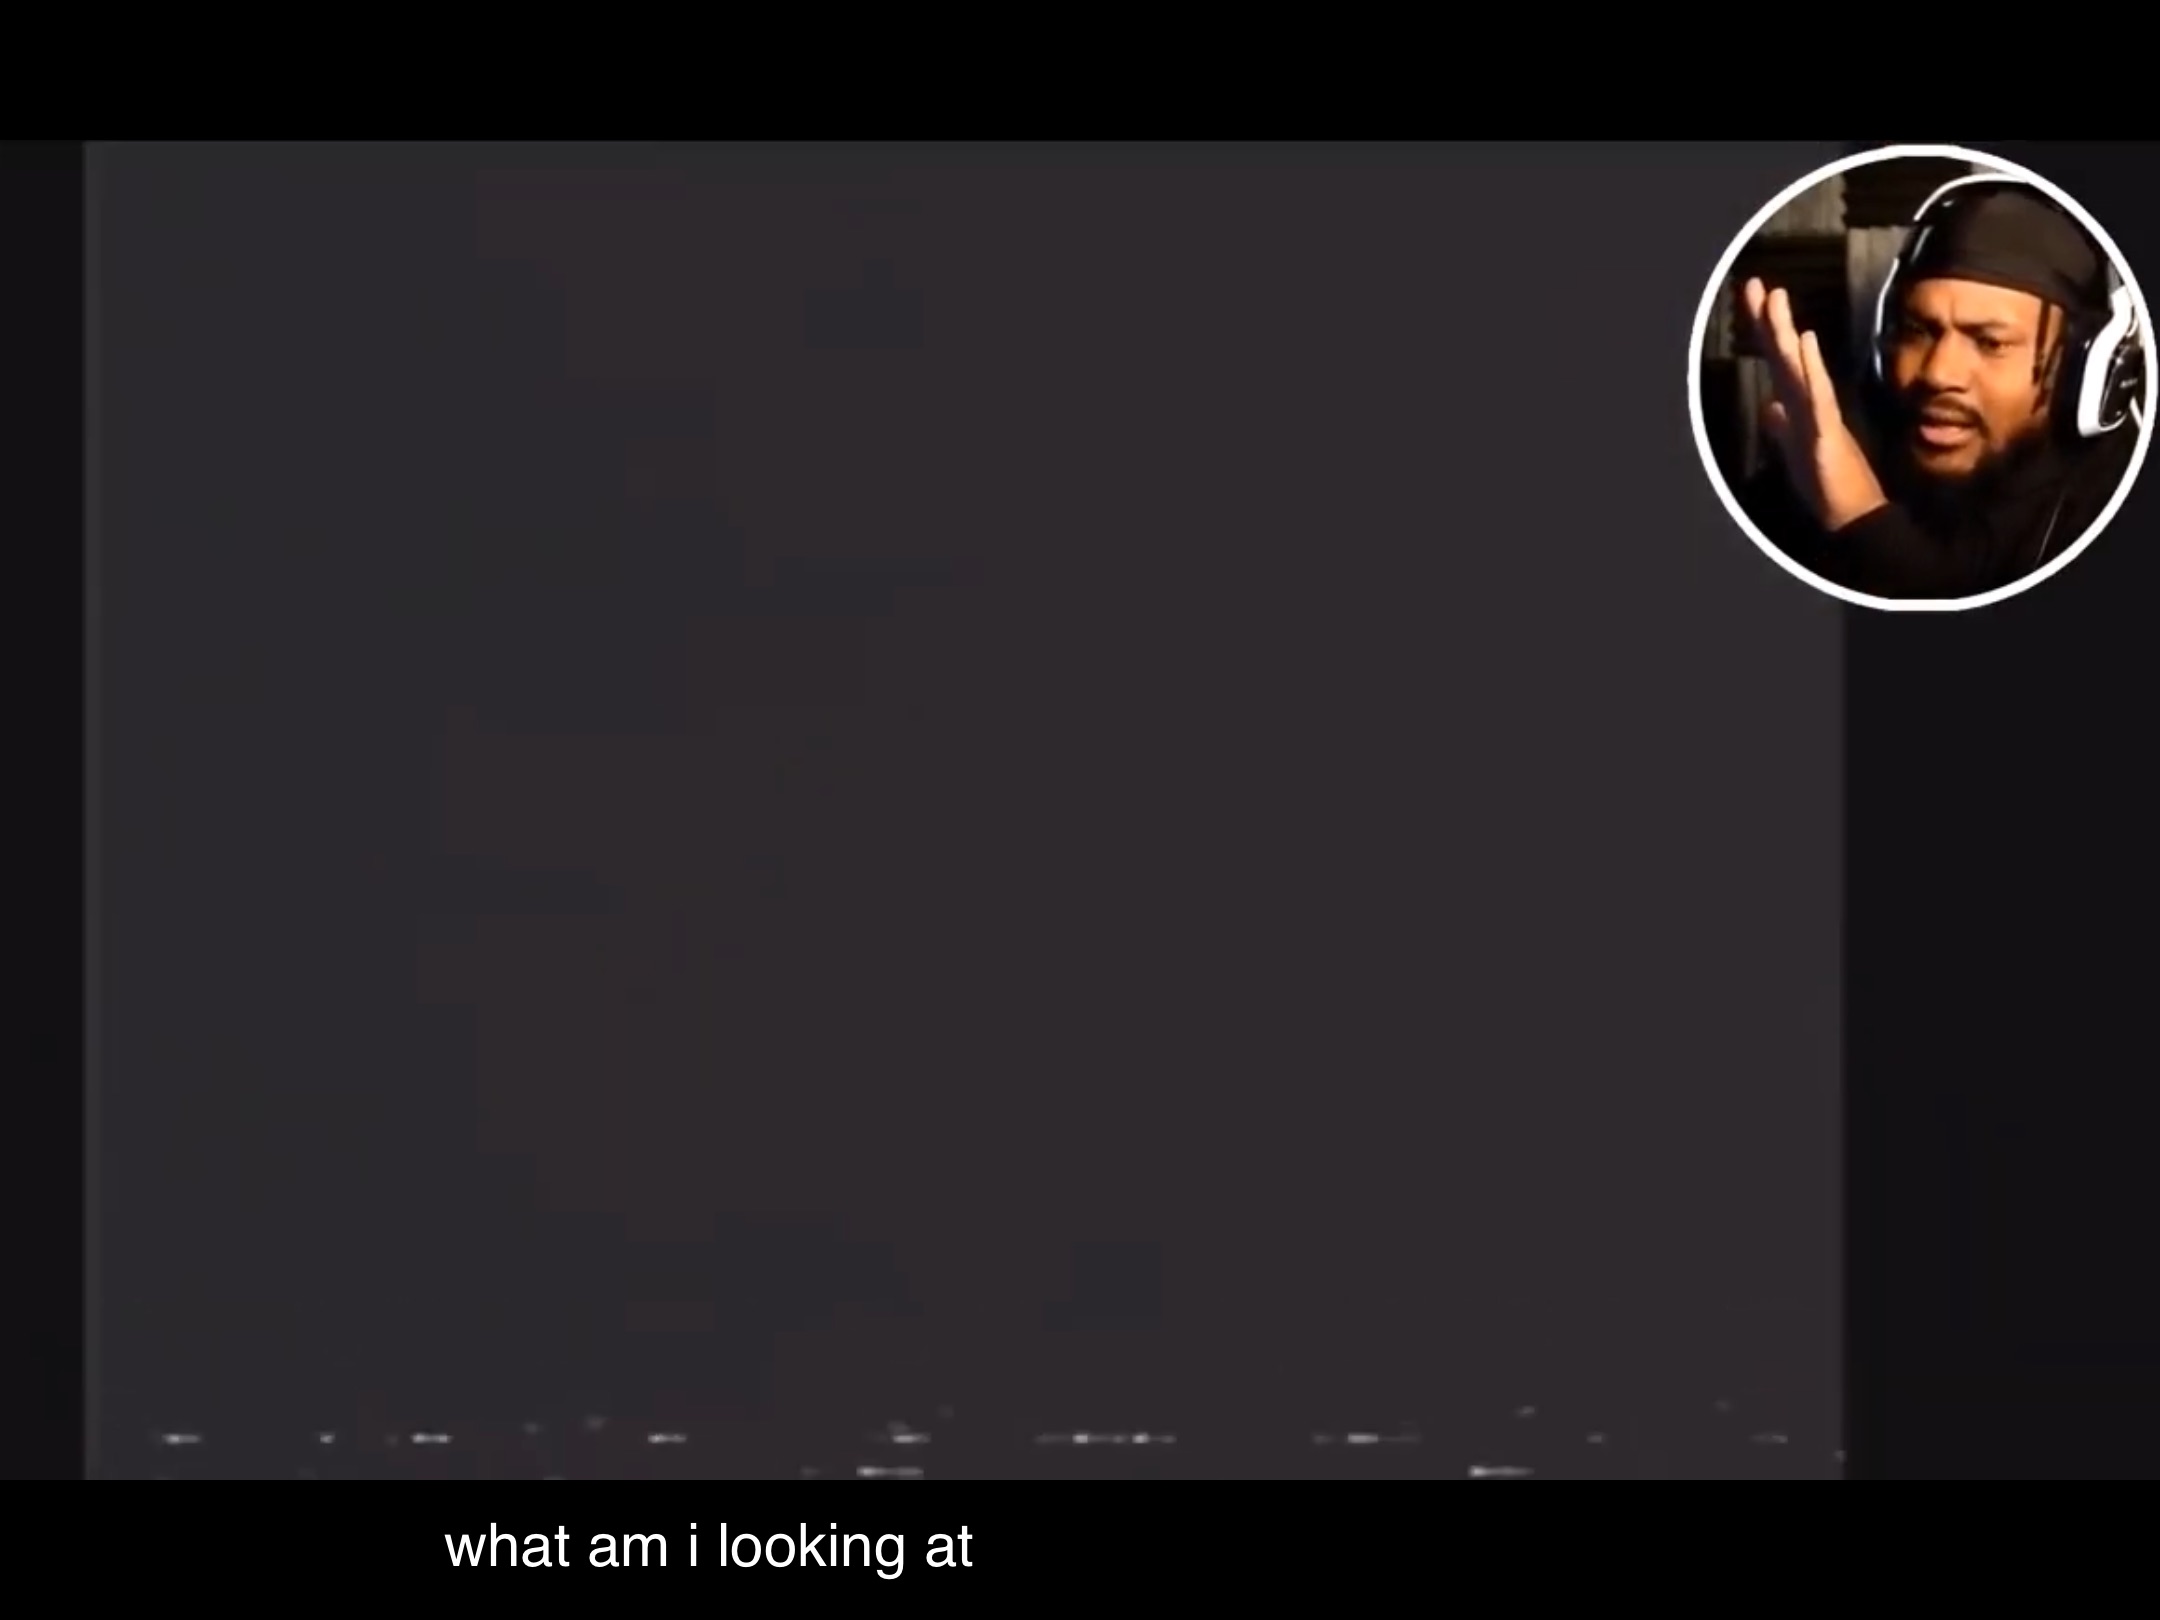 Cory “What am I looking at?” Blank Meme Template